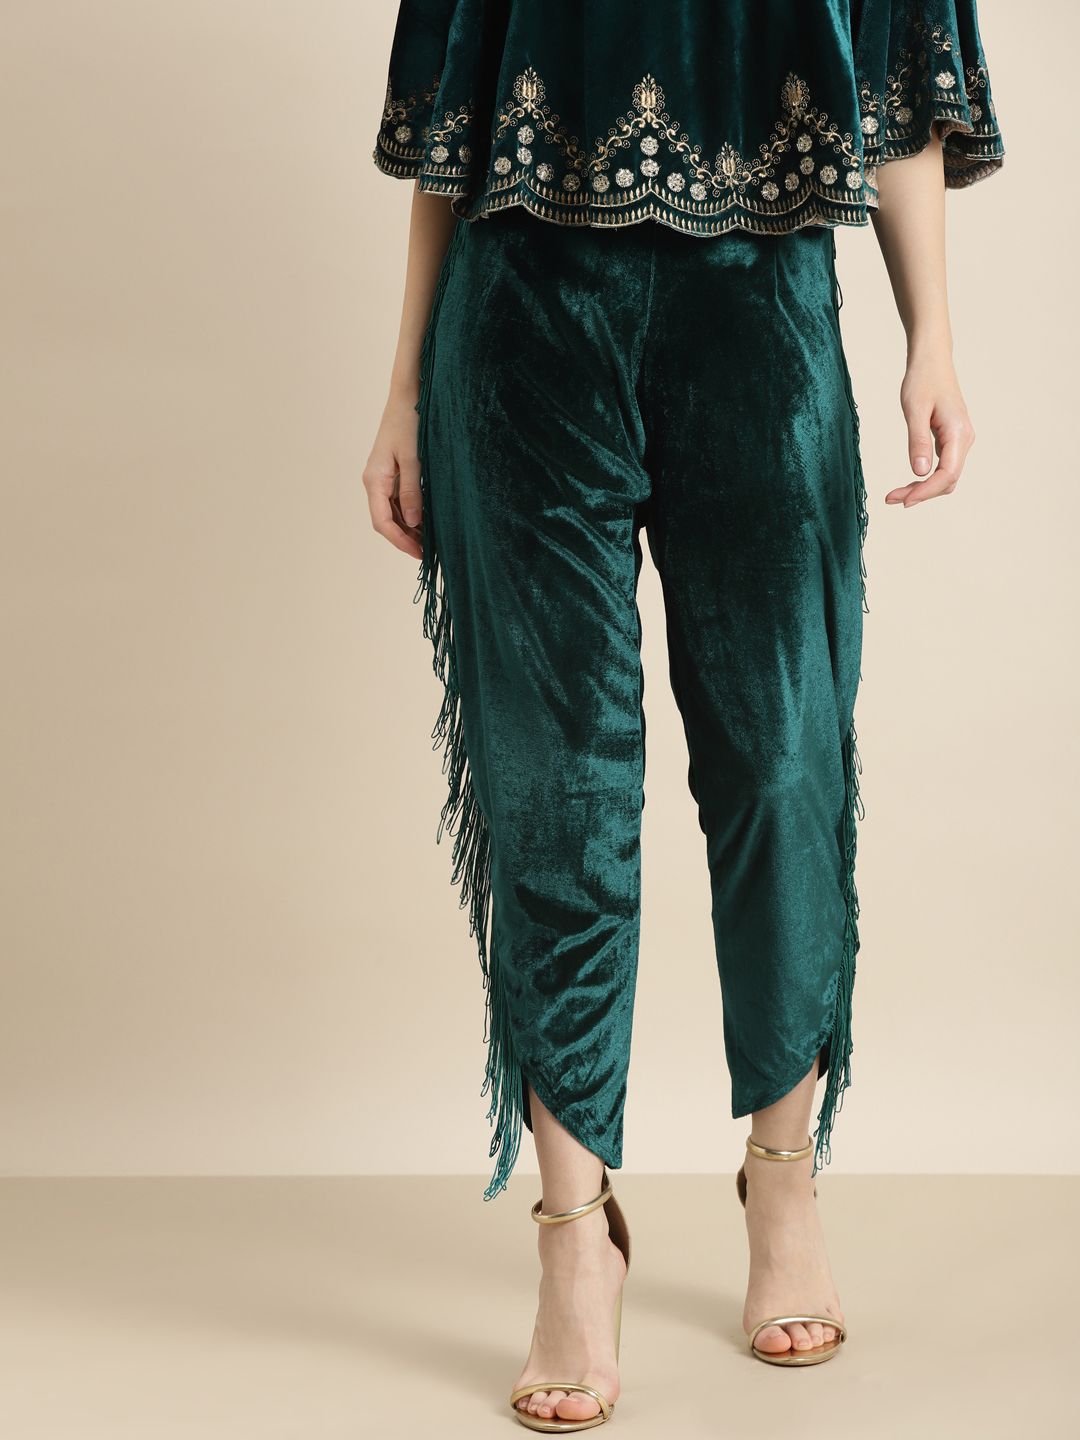 Shae by SASSAFRAS Women Teal Green Trousers Price in India